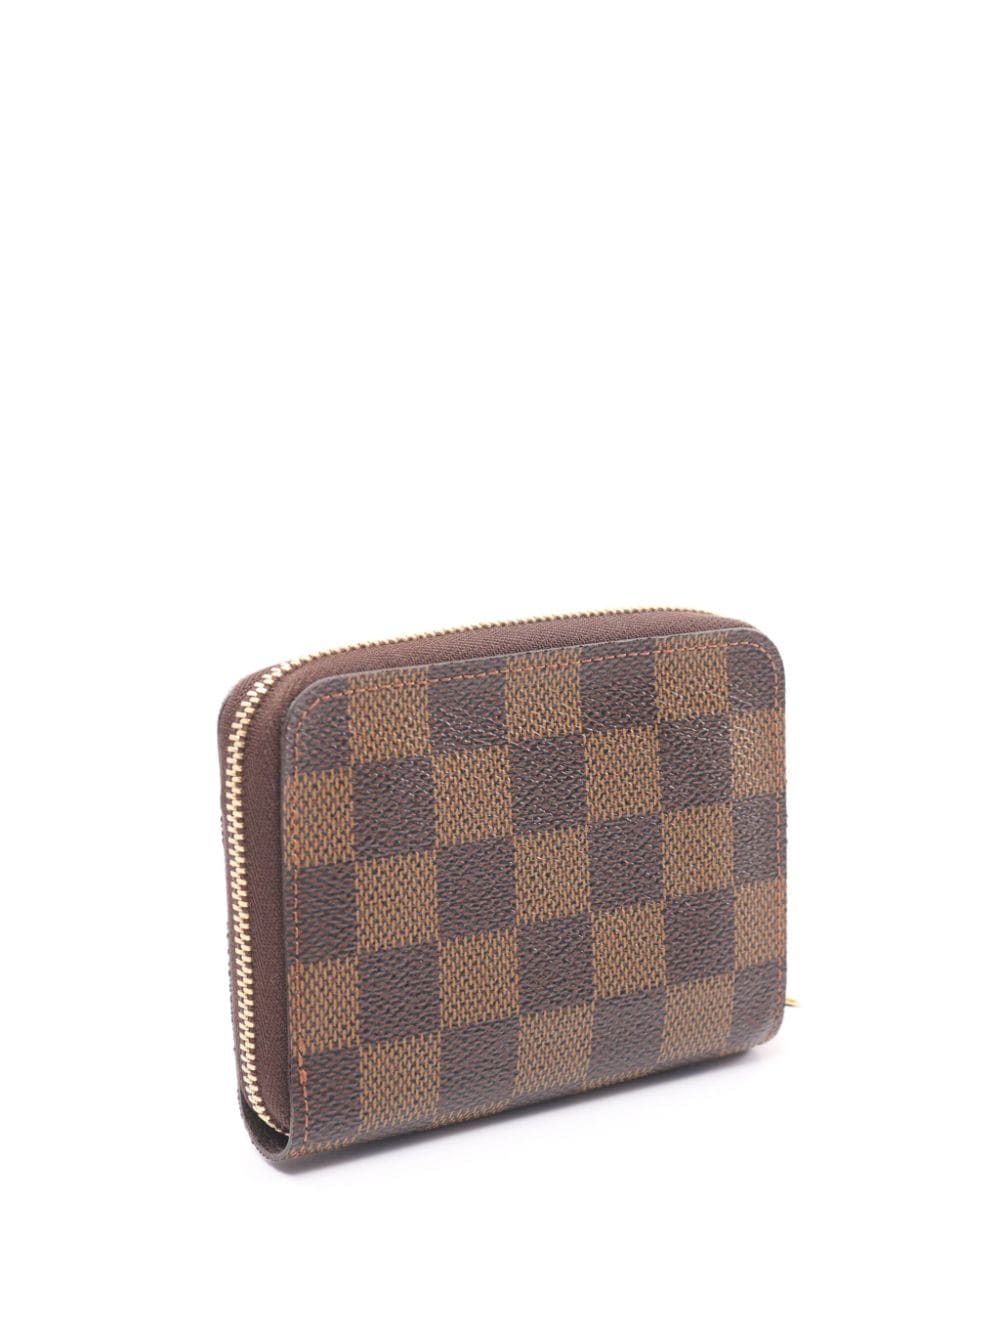 Pre-owned Louis Vuitton 2012 Zippy Coin Purse In Brown